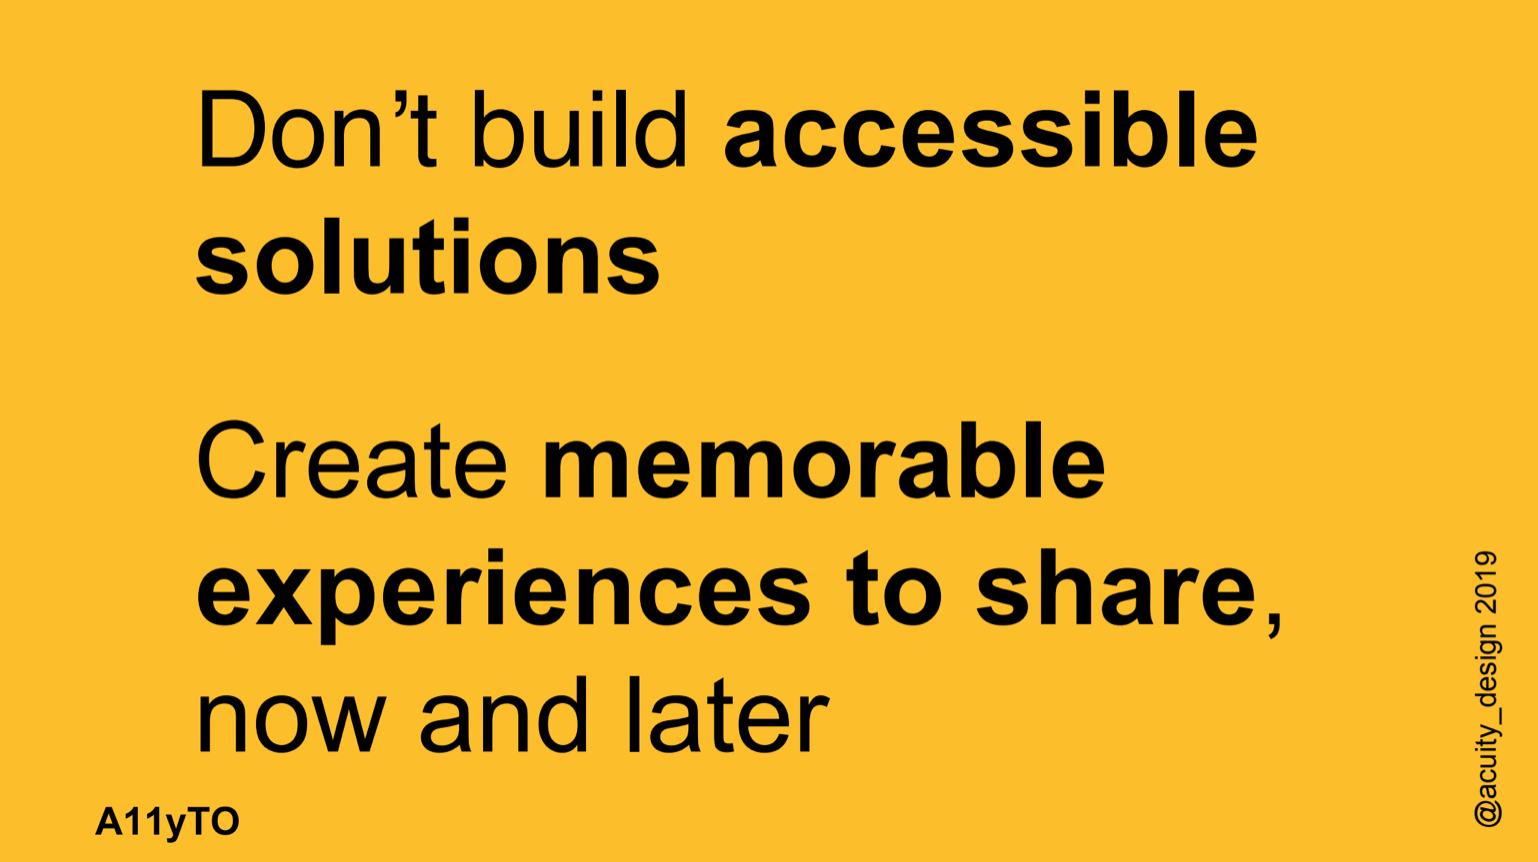 "Don't build accessible solutions. Create memorable experiences to share, now and later."